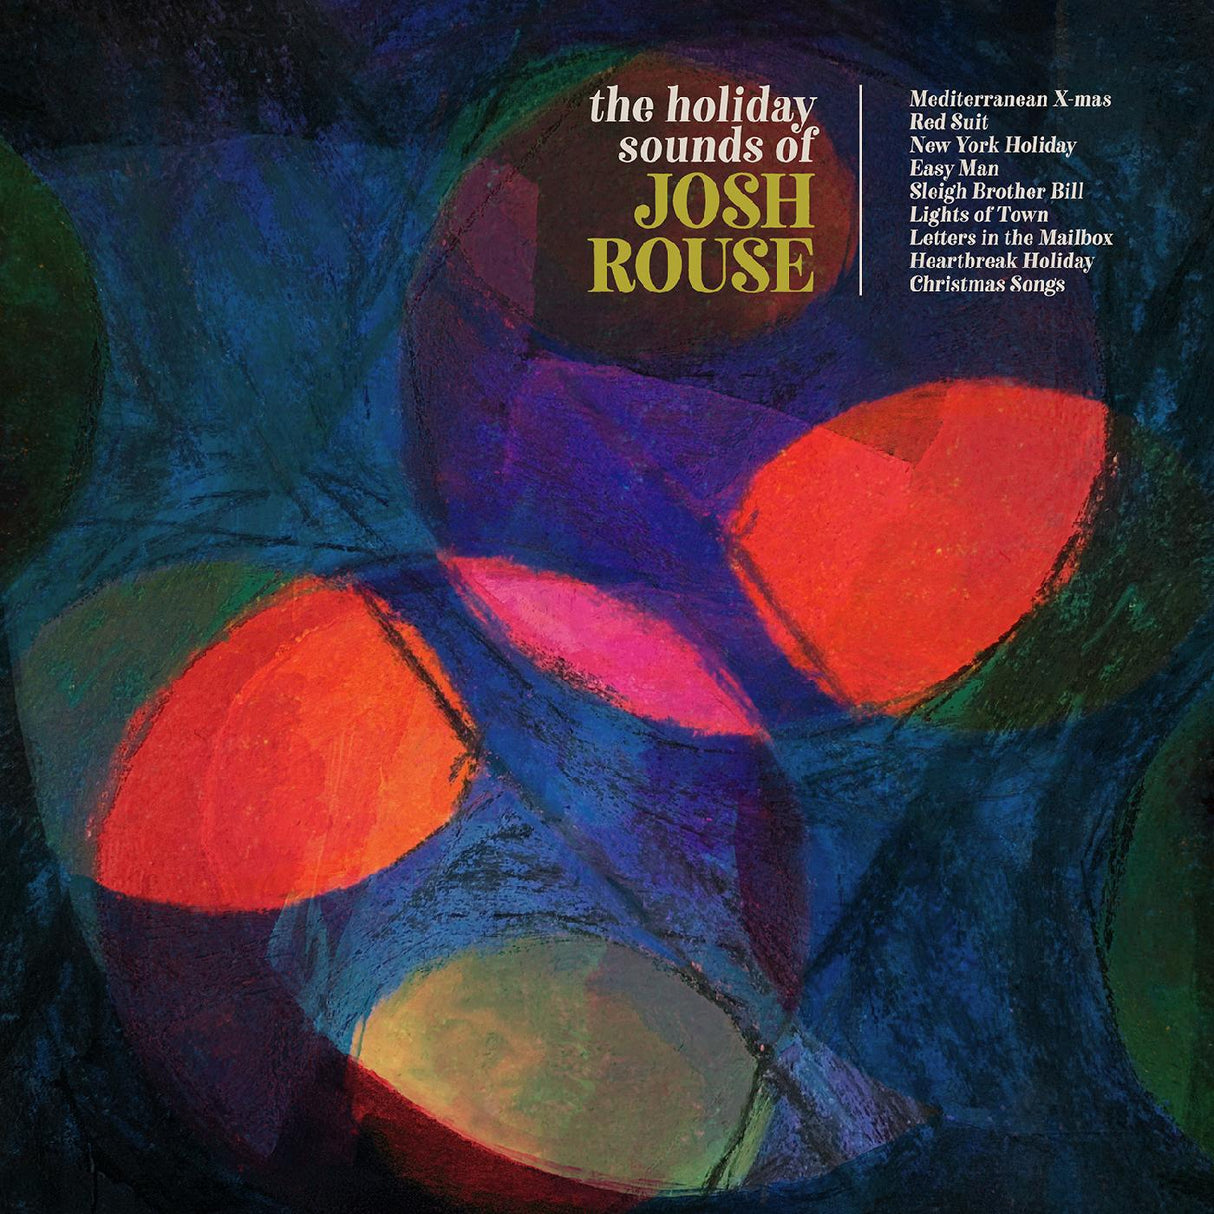 The Holiday Sounds of Josh Rouse (COLOR VINYL) [Vinyl]